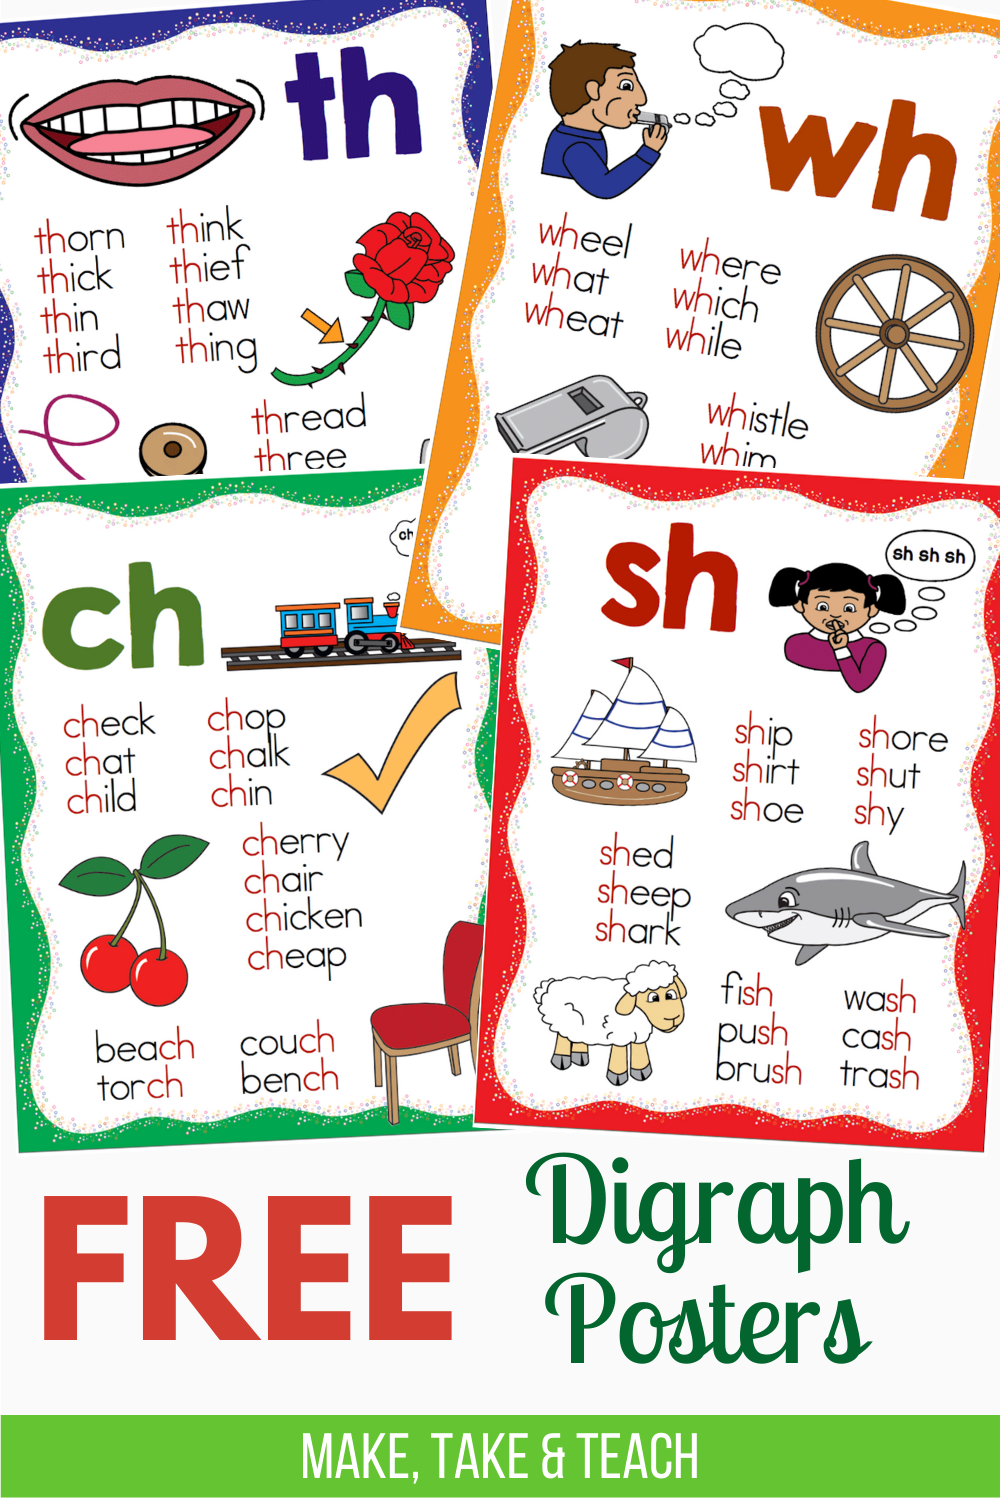 consonant-digraphs-consonant-digraphs-digraph-digraph-words-images